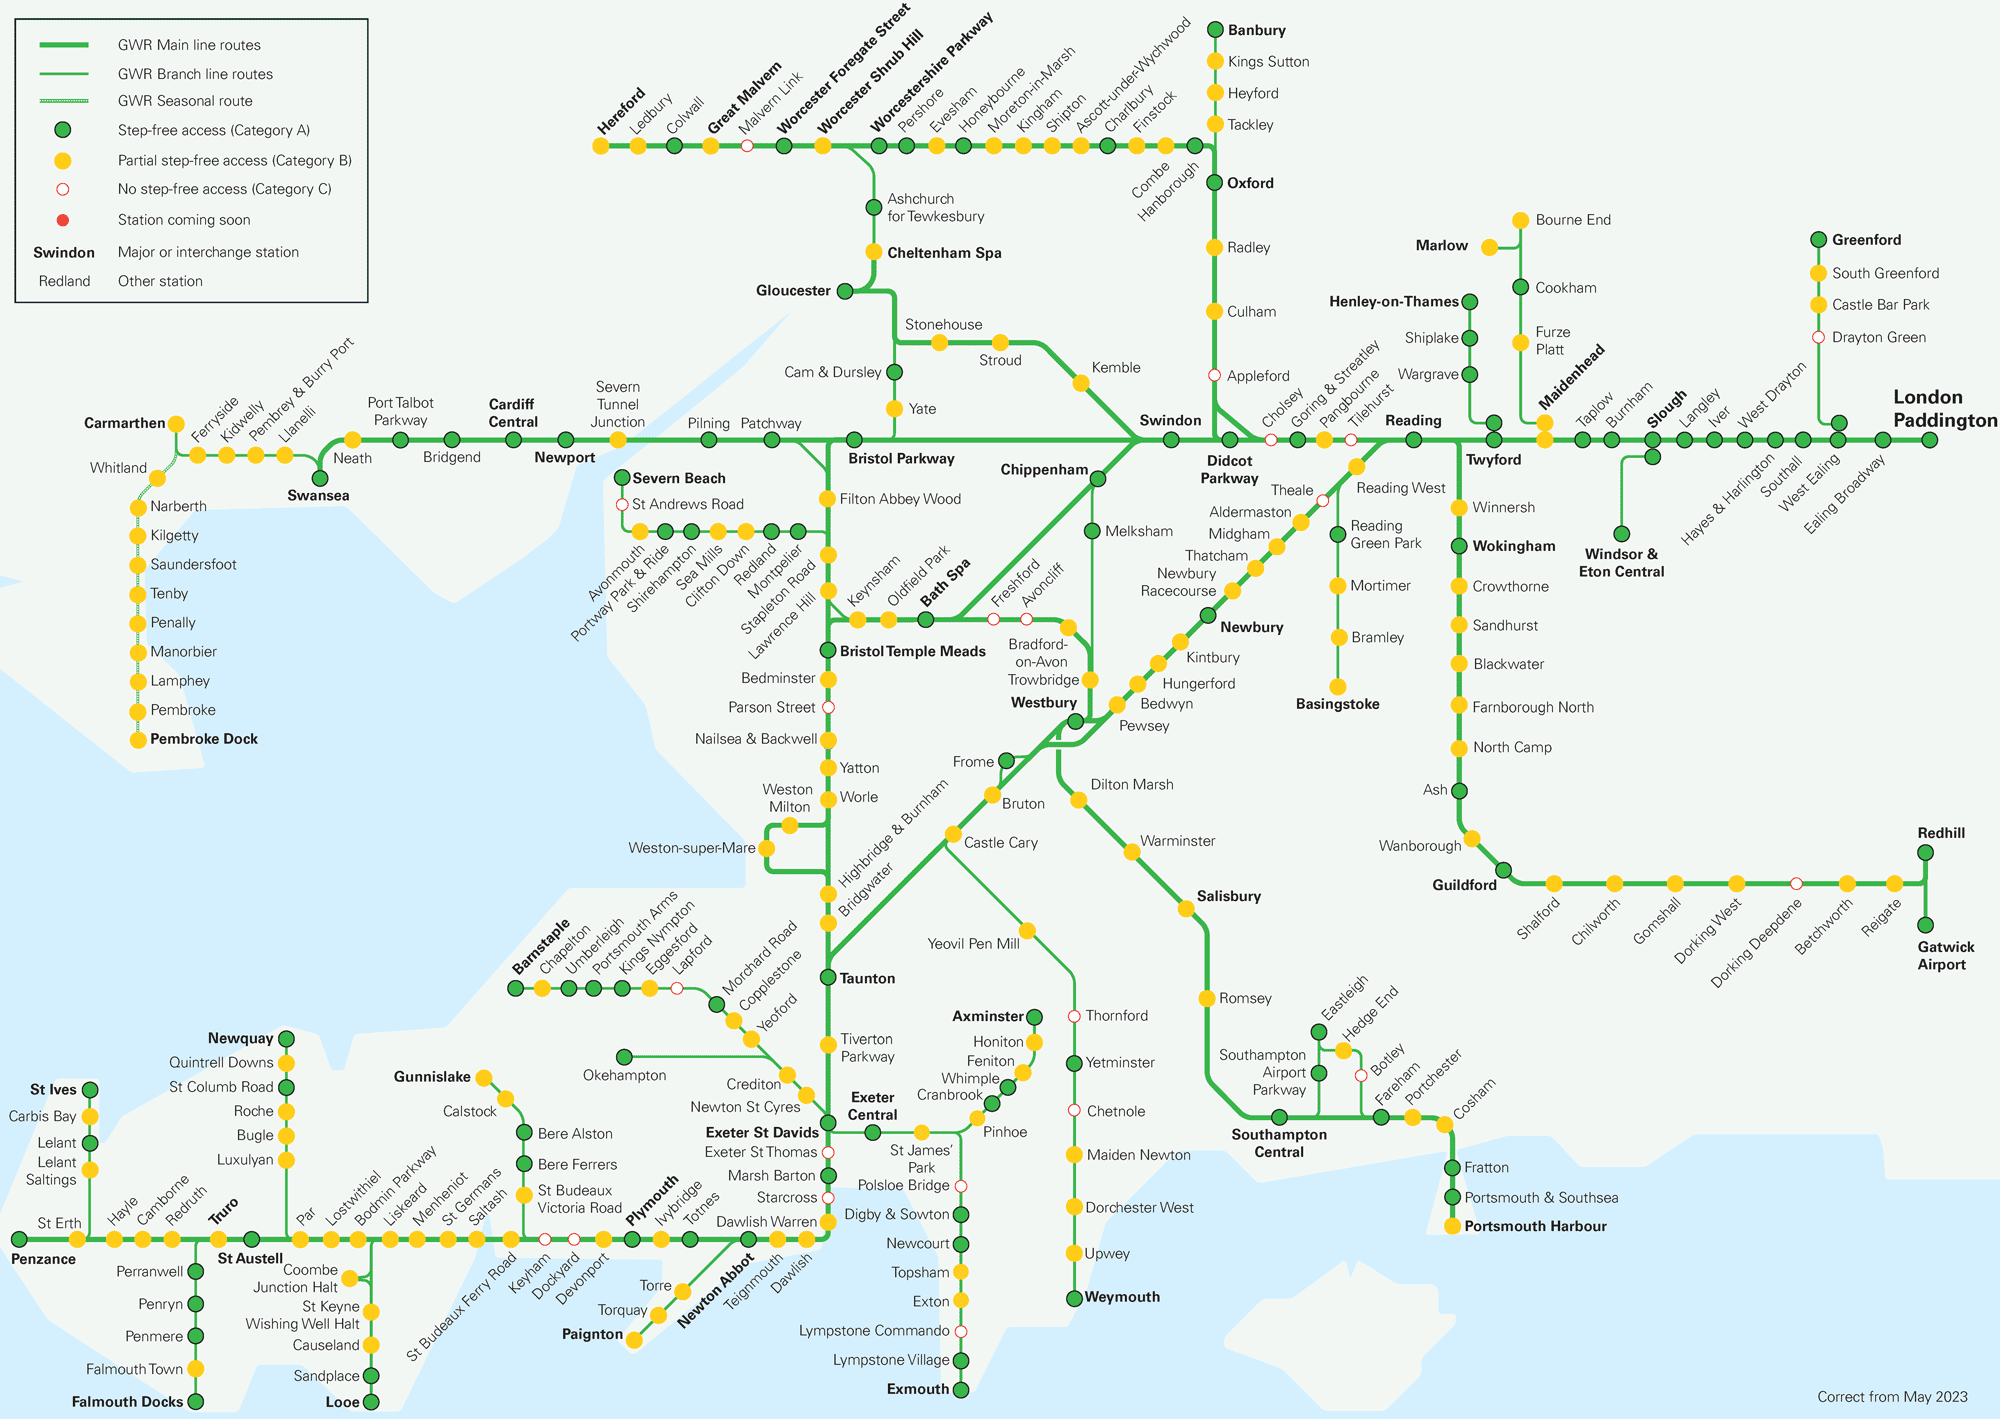 Detailed map of GWR rail network including Devon and Cornwall